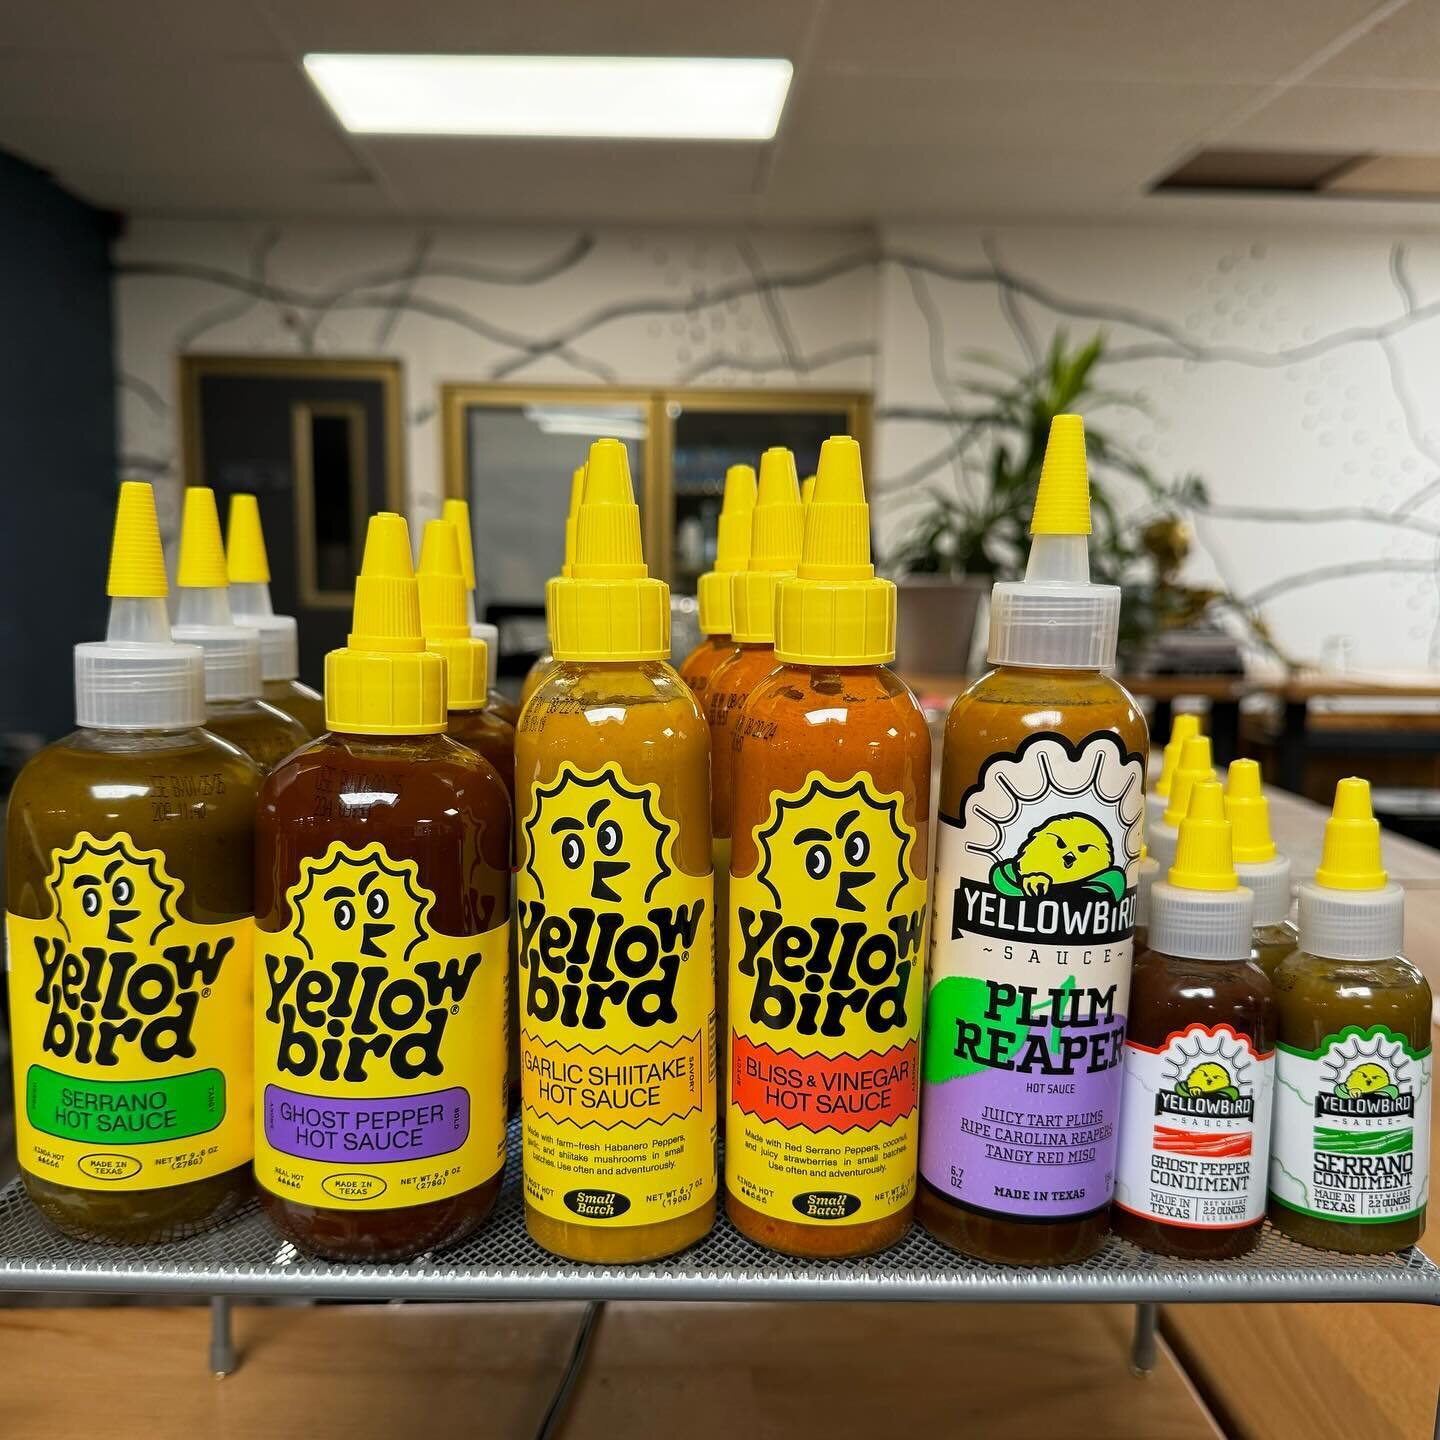 🚨 RESTOCK 🚨 our favorite @yellowbirdsauce sauces are back in stock for retail including the Bliss &amp; Vinegar and Garlic Shiitake small batch sauces. These are very FU**ING good and make me miss Texas (kinda 🤣). Plus peep their new branding 👀 
